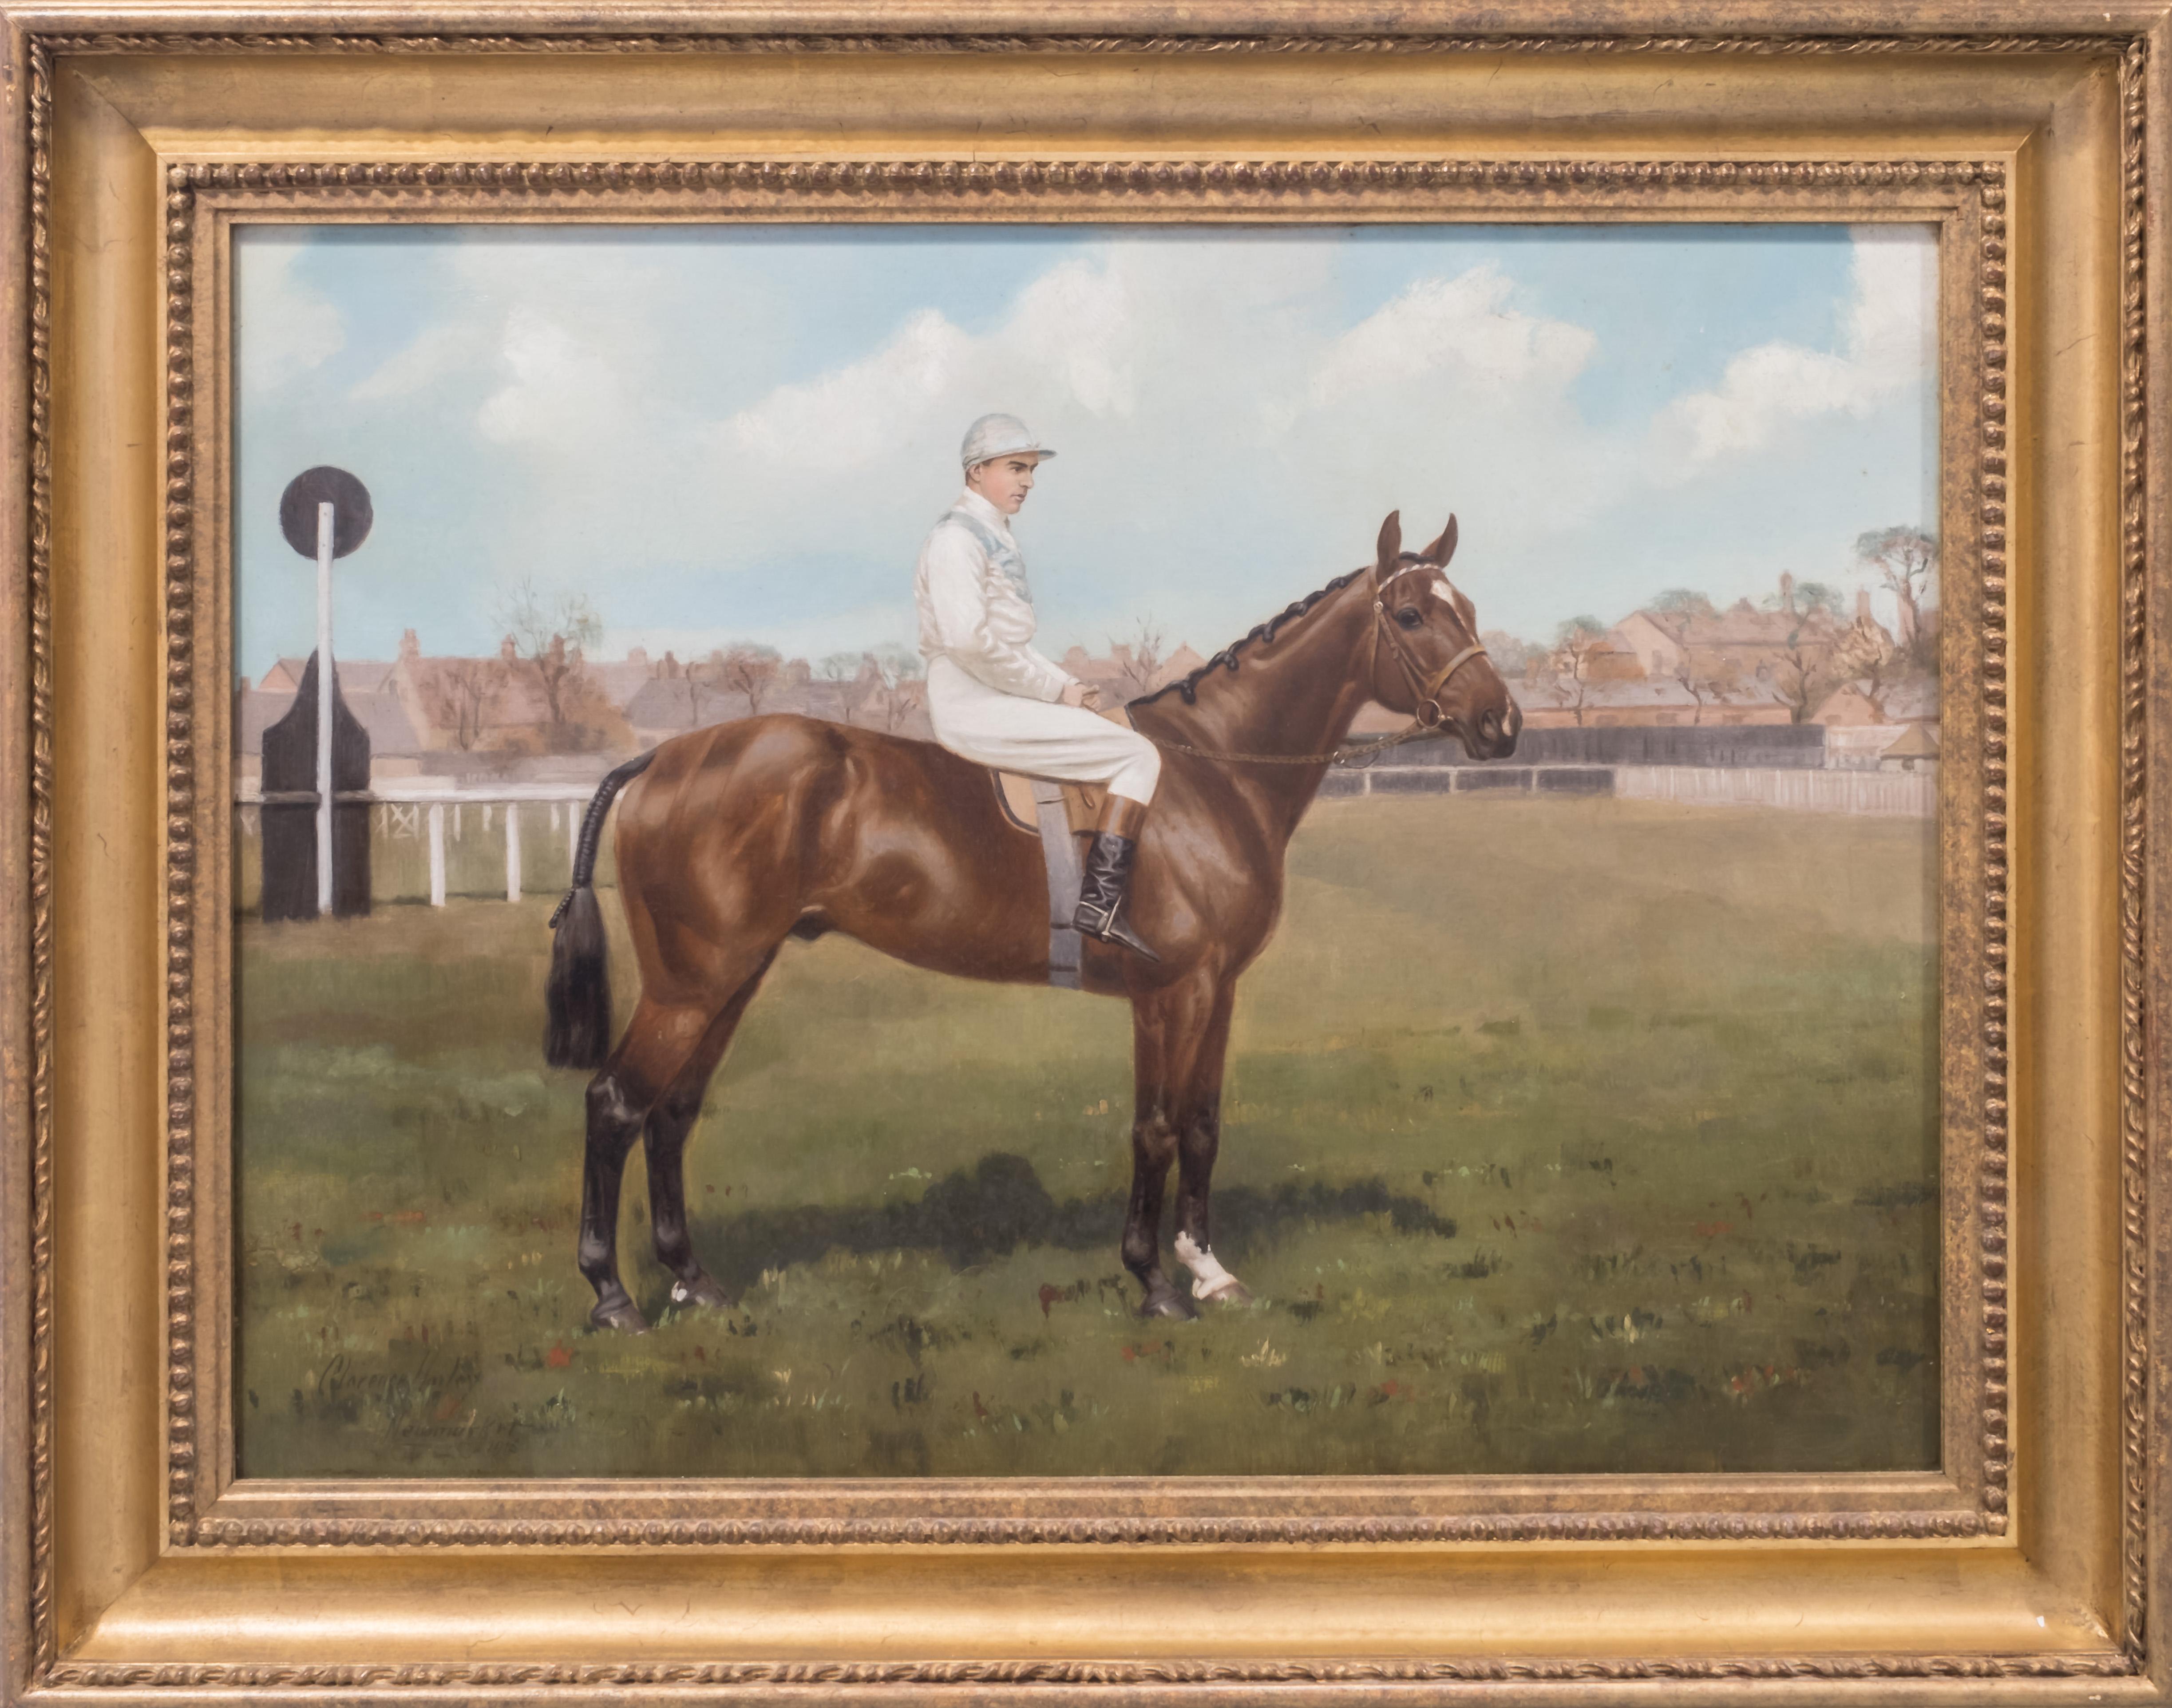 Portrait of jockey and racehorse